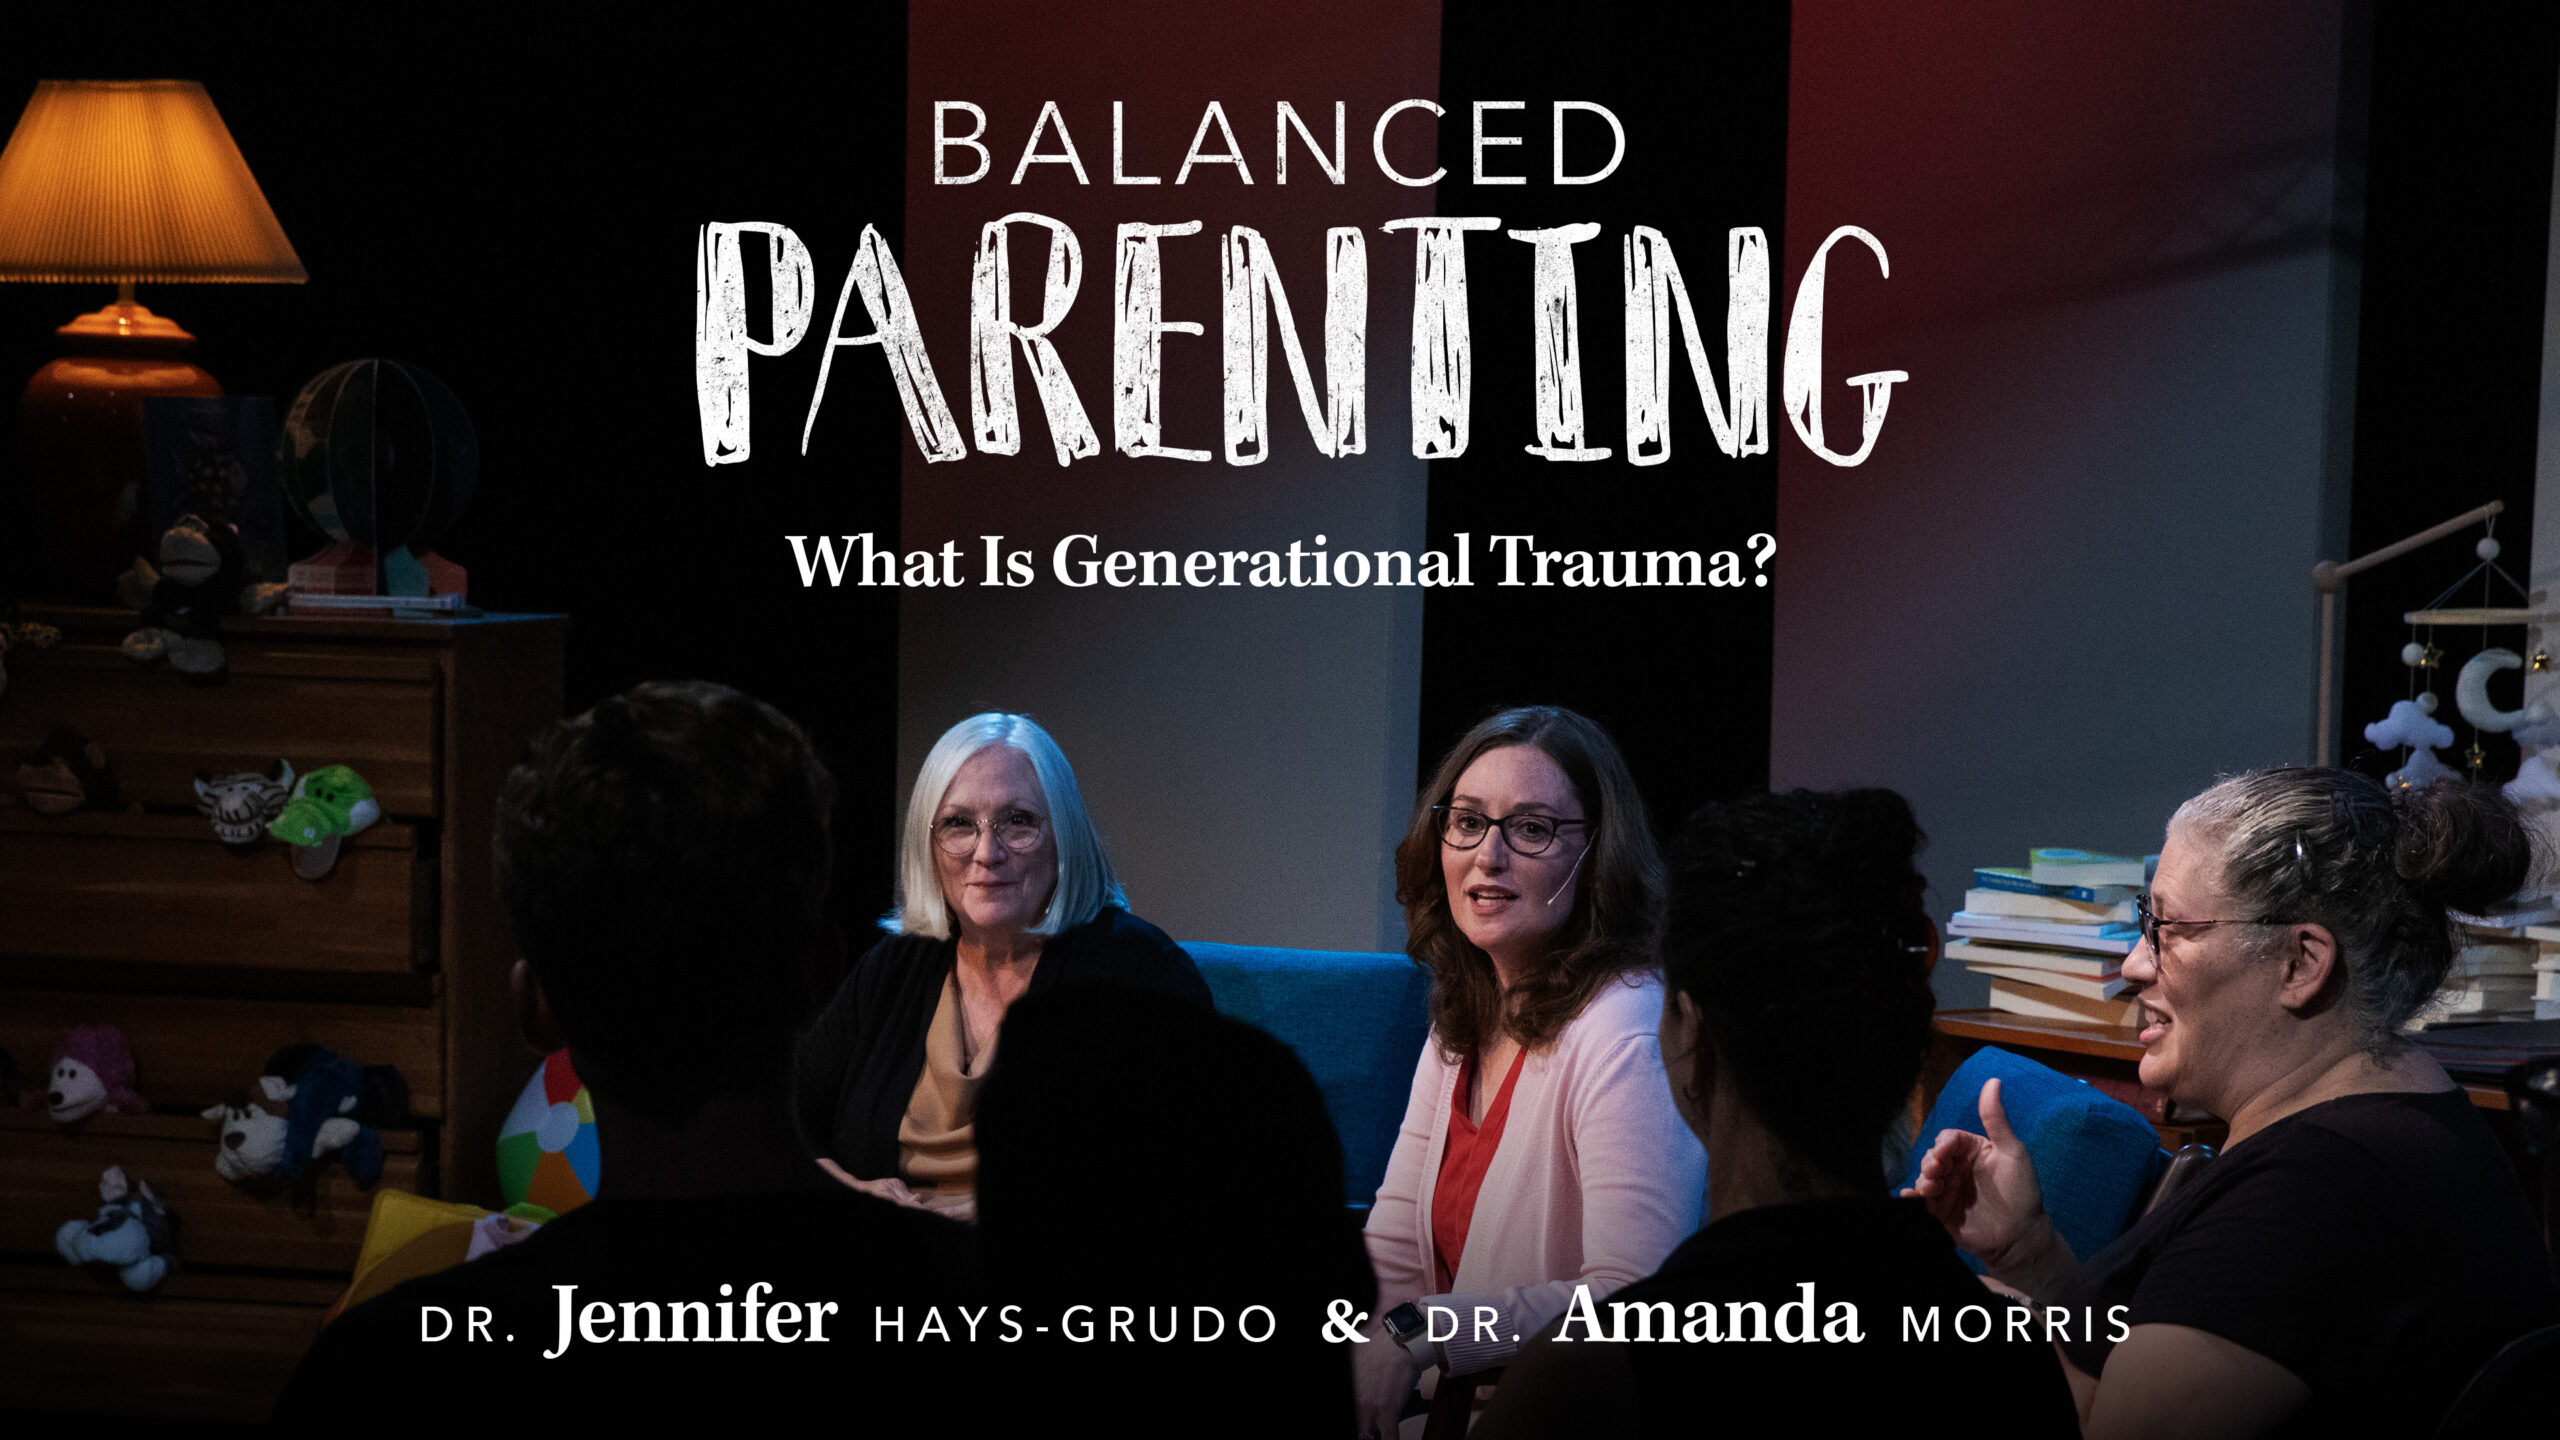 Episode Two: What Is Generational Trauma?